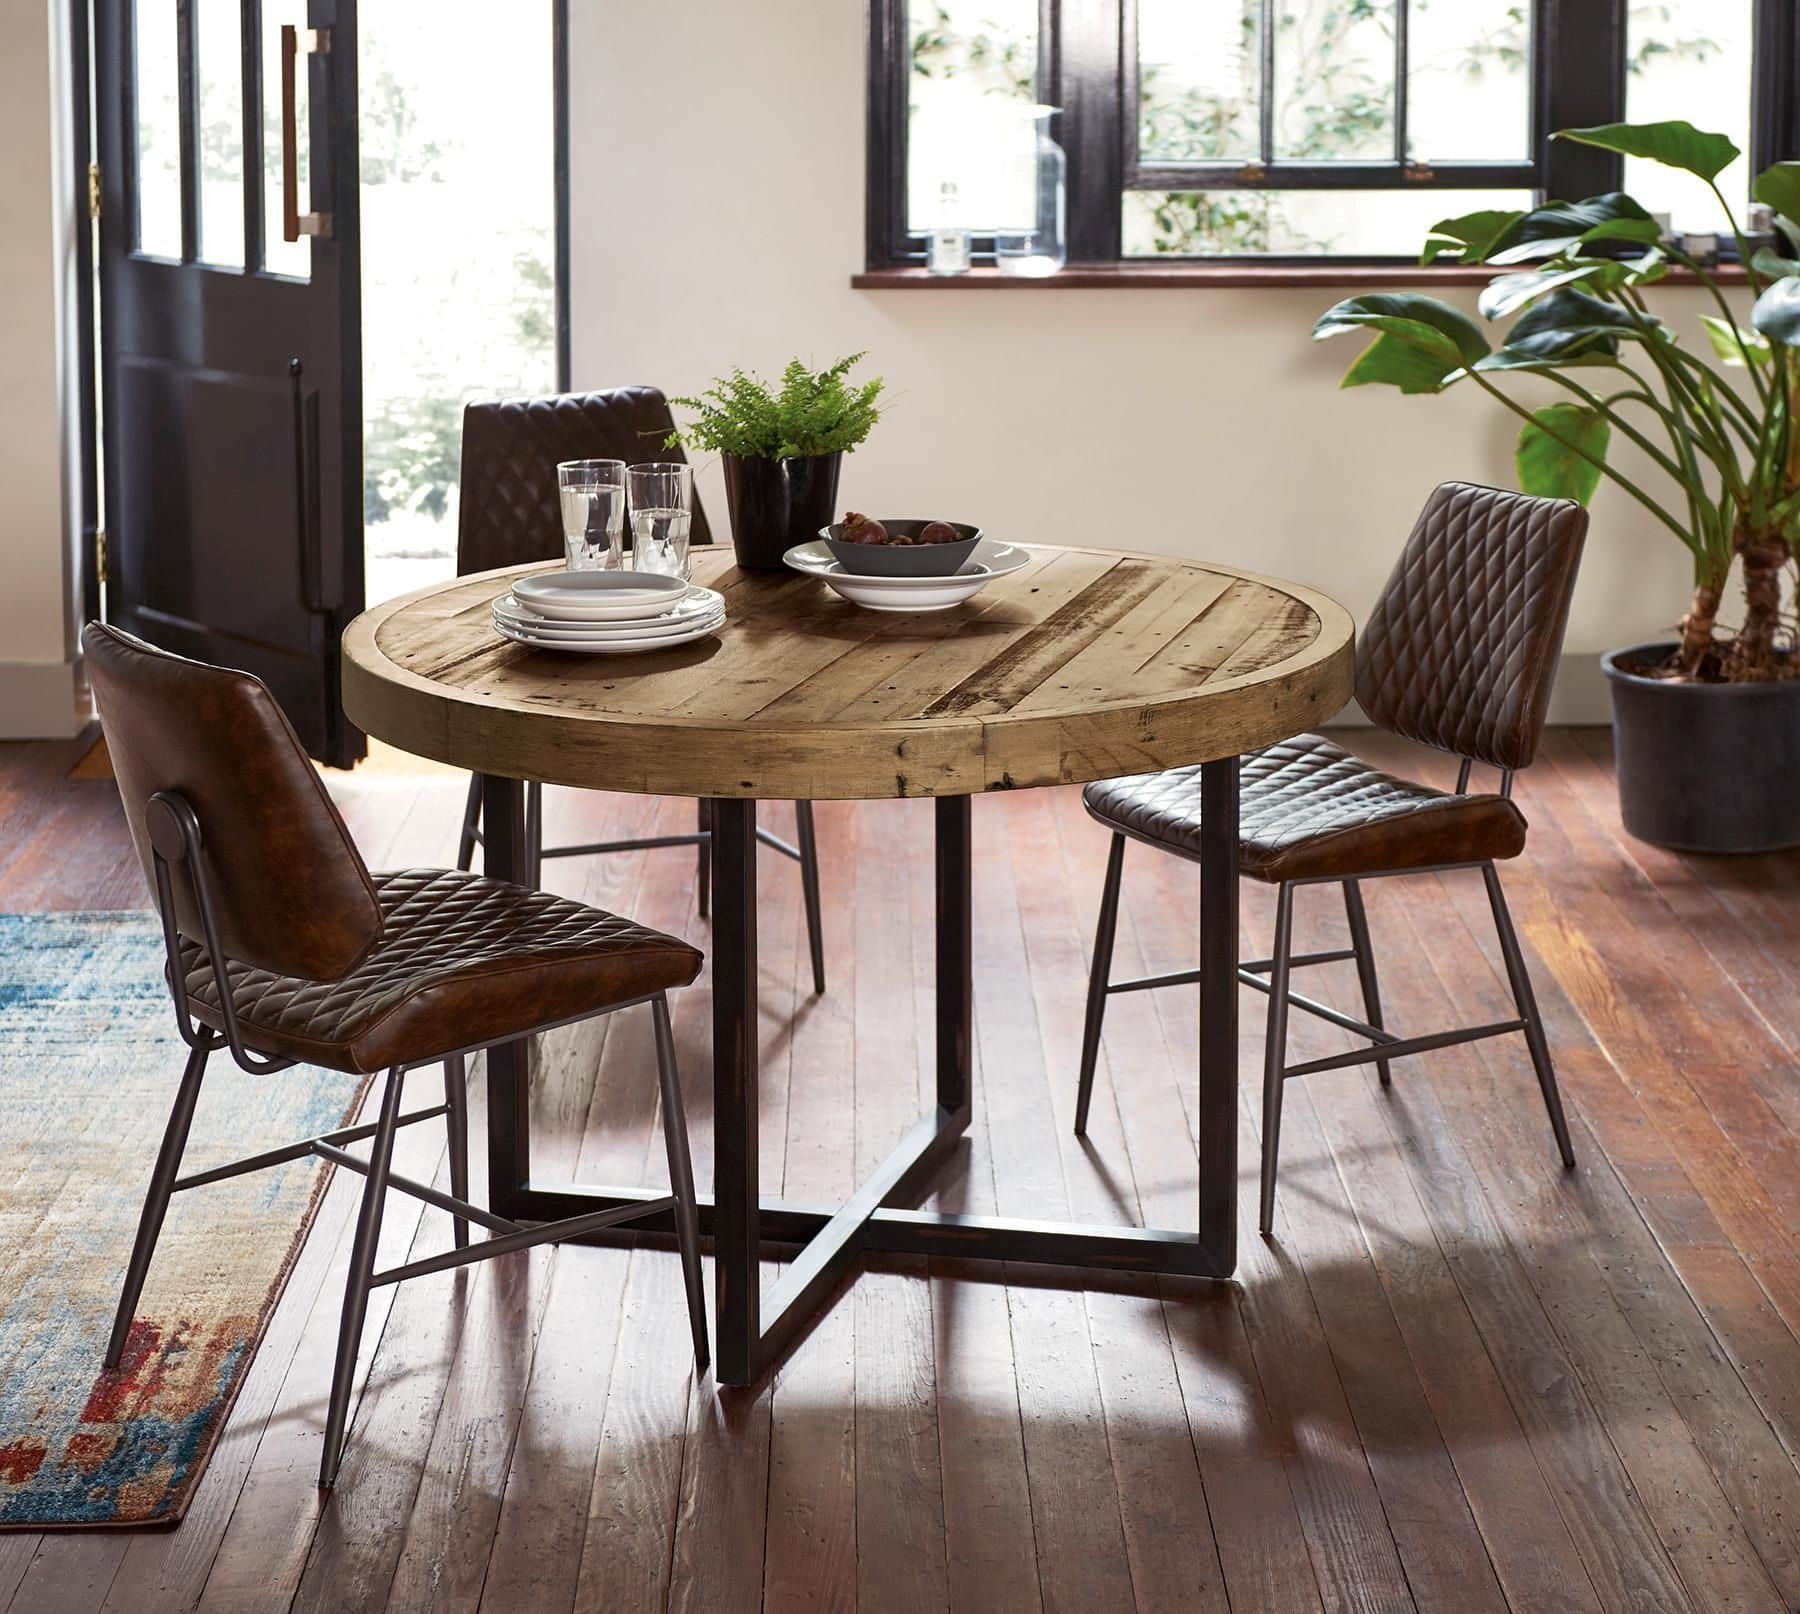 Buy Blake Round Dining Table By Baker Furniture from the Next UK online ...